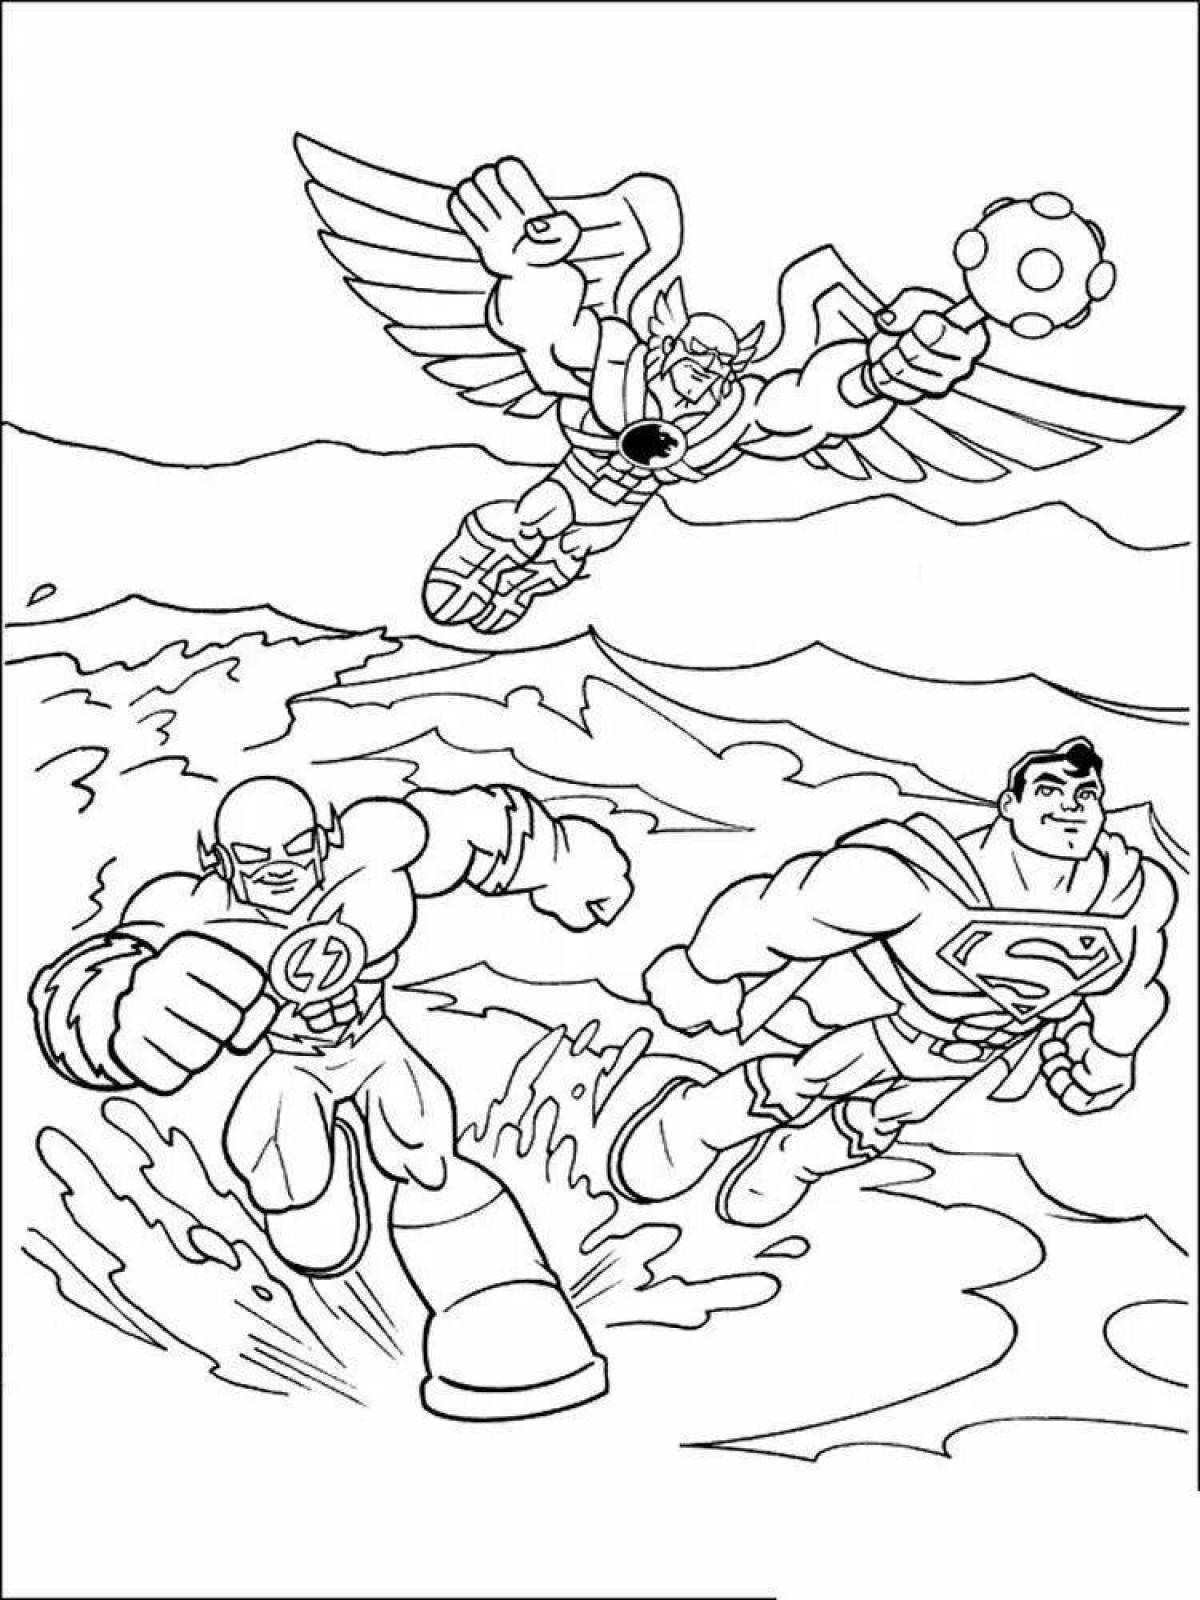 Playful super strikers coloring page